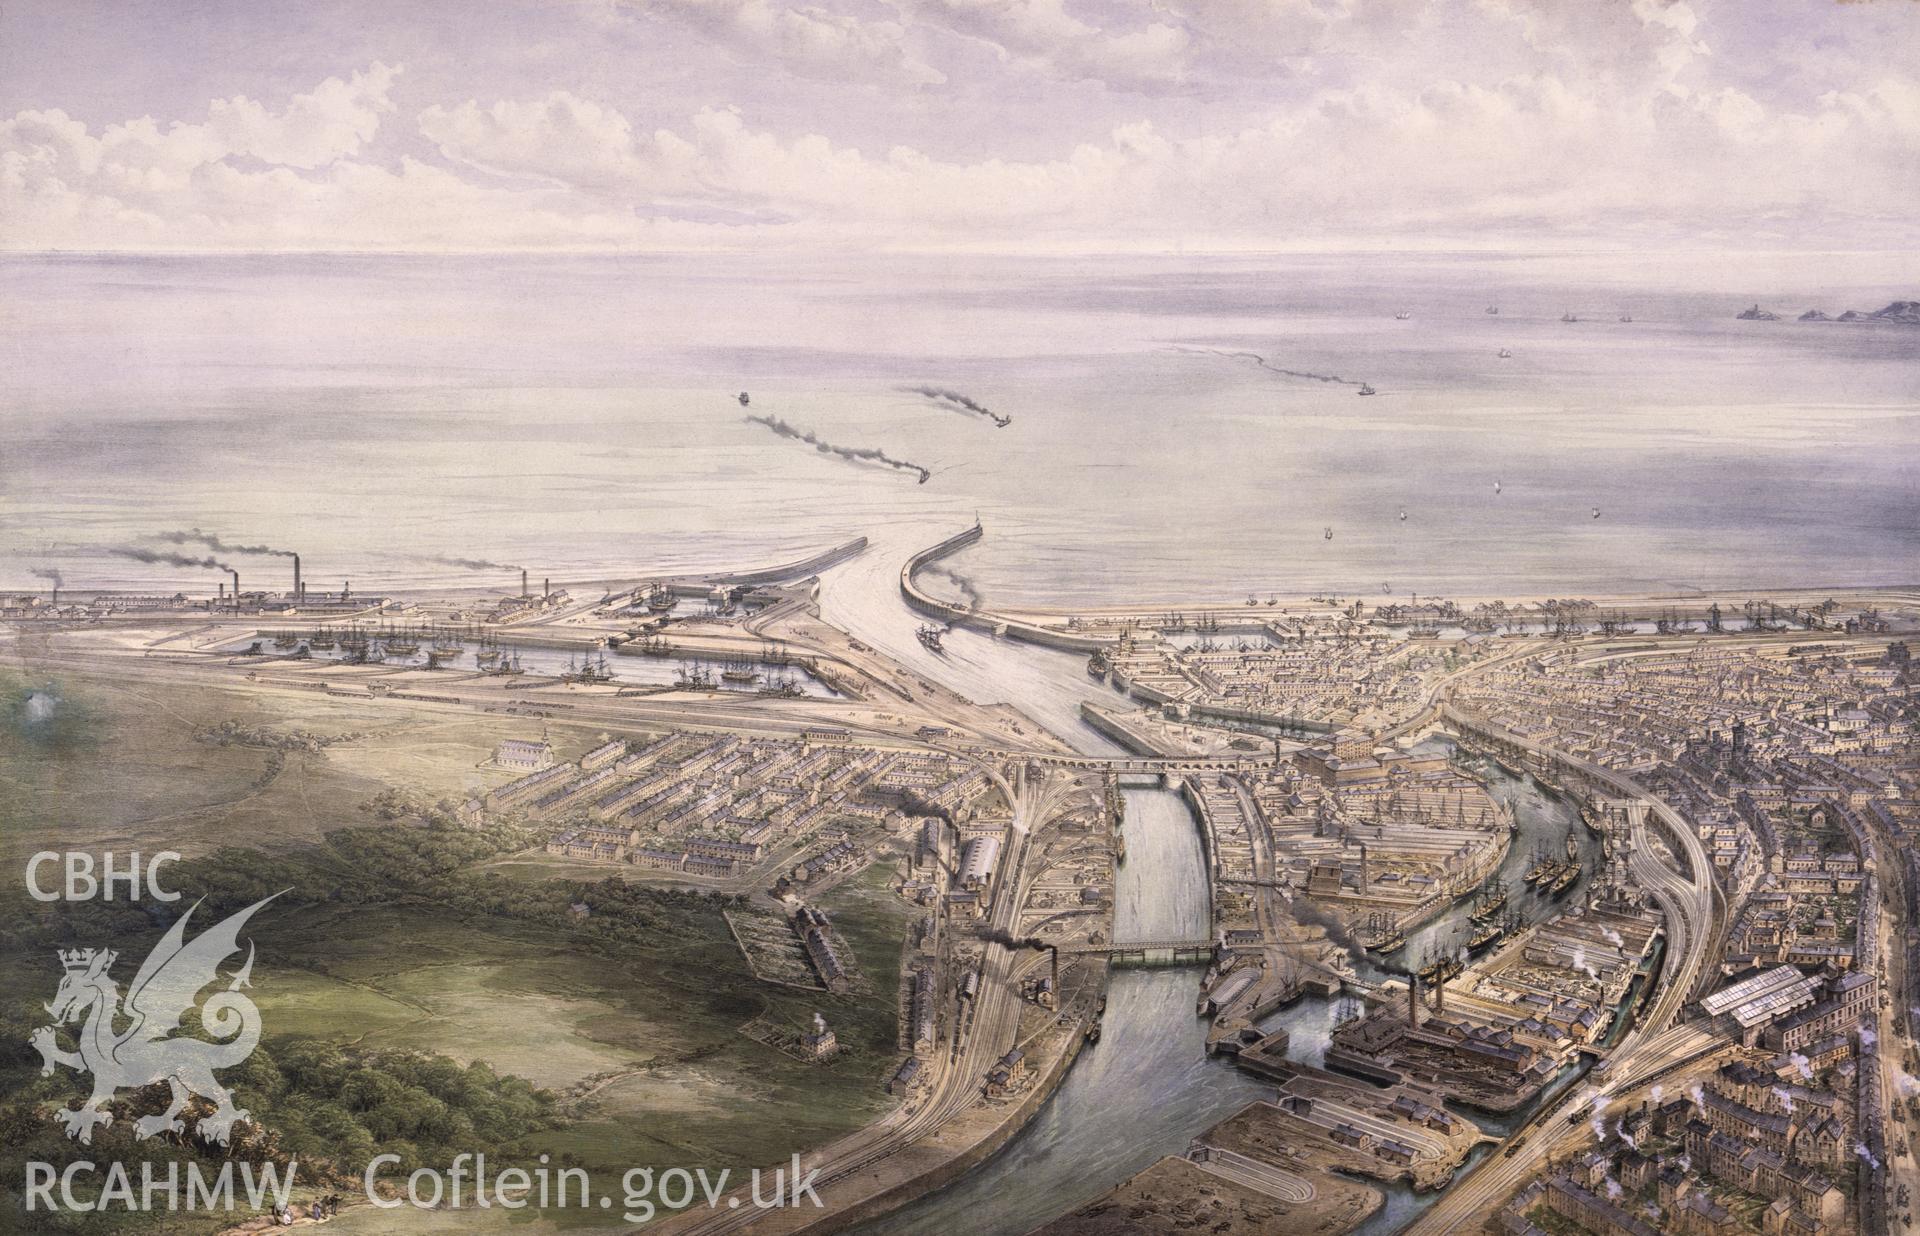 Digitised copy of an RCAHMW colour transparency of painting of an aerial view of Swansea Harbour. Original painting is hanging in Associated British Ports, Swansea and Port Talbot. Original not yet transferred to NMRW Archive.